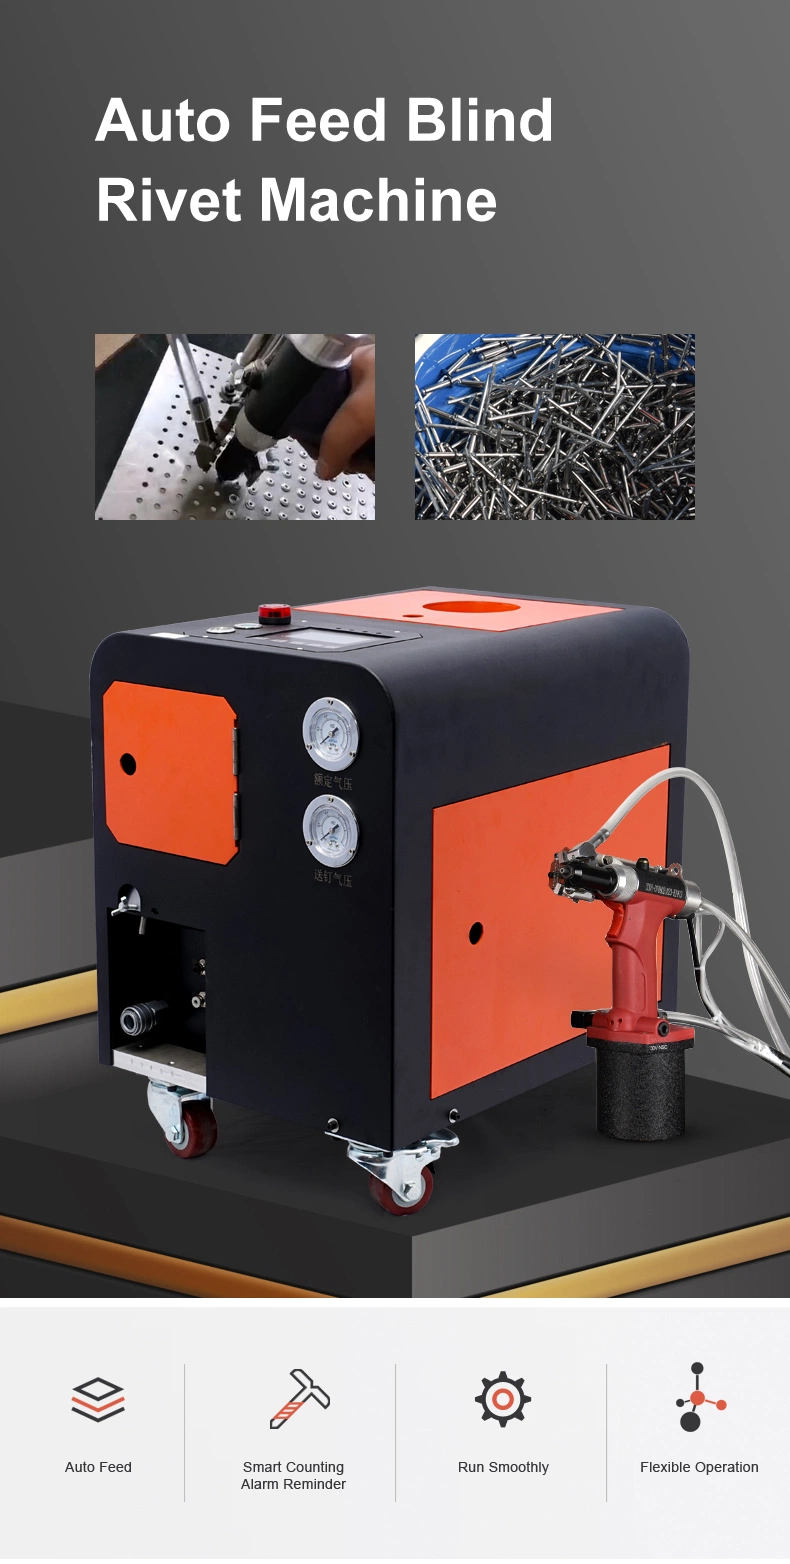 The Best-Selling Riveting Ability 2.4-6.4 Automation Feed Robot I/O Connection Rivet Machine